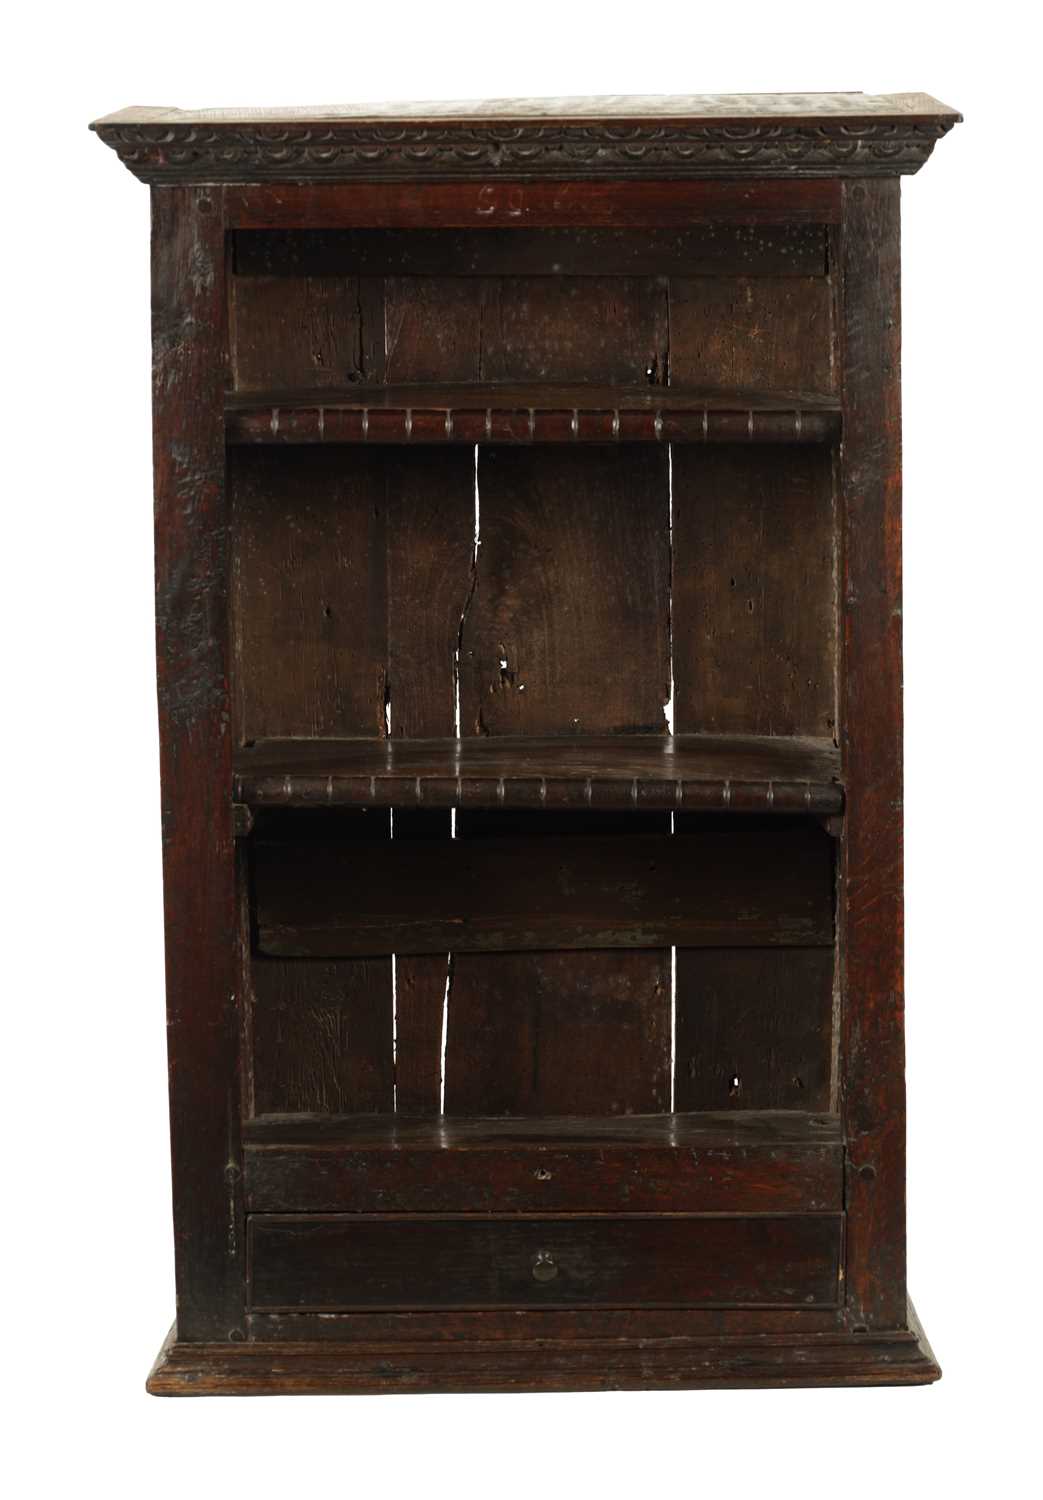 A 17TH CENTURY OAK HANGING OPEN SPICE RACK WITH FITTED DRAWER